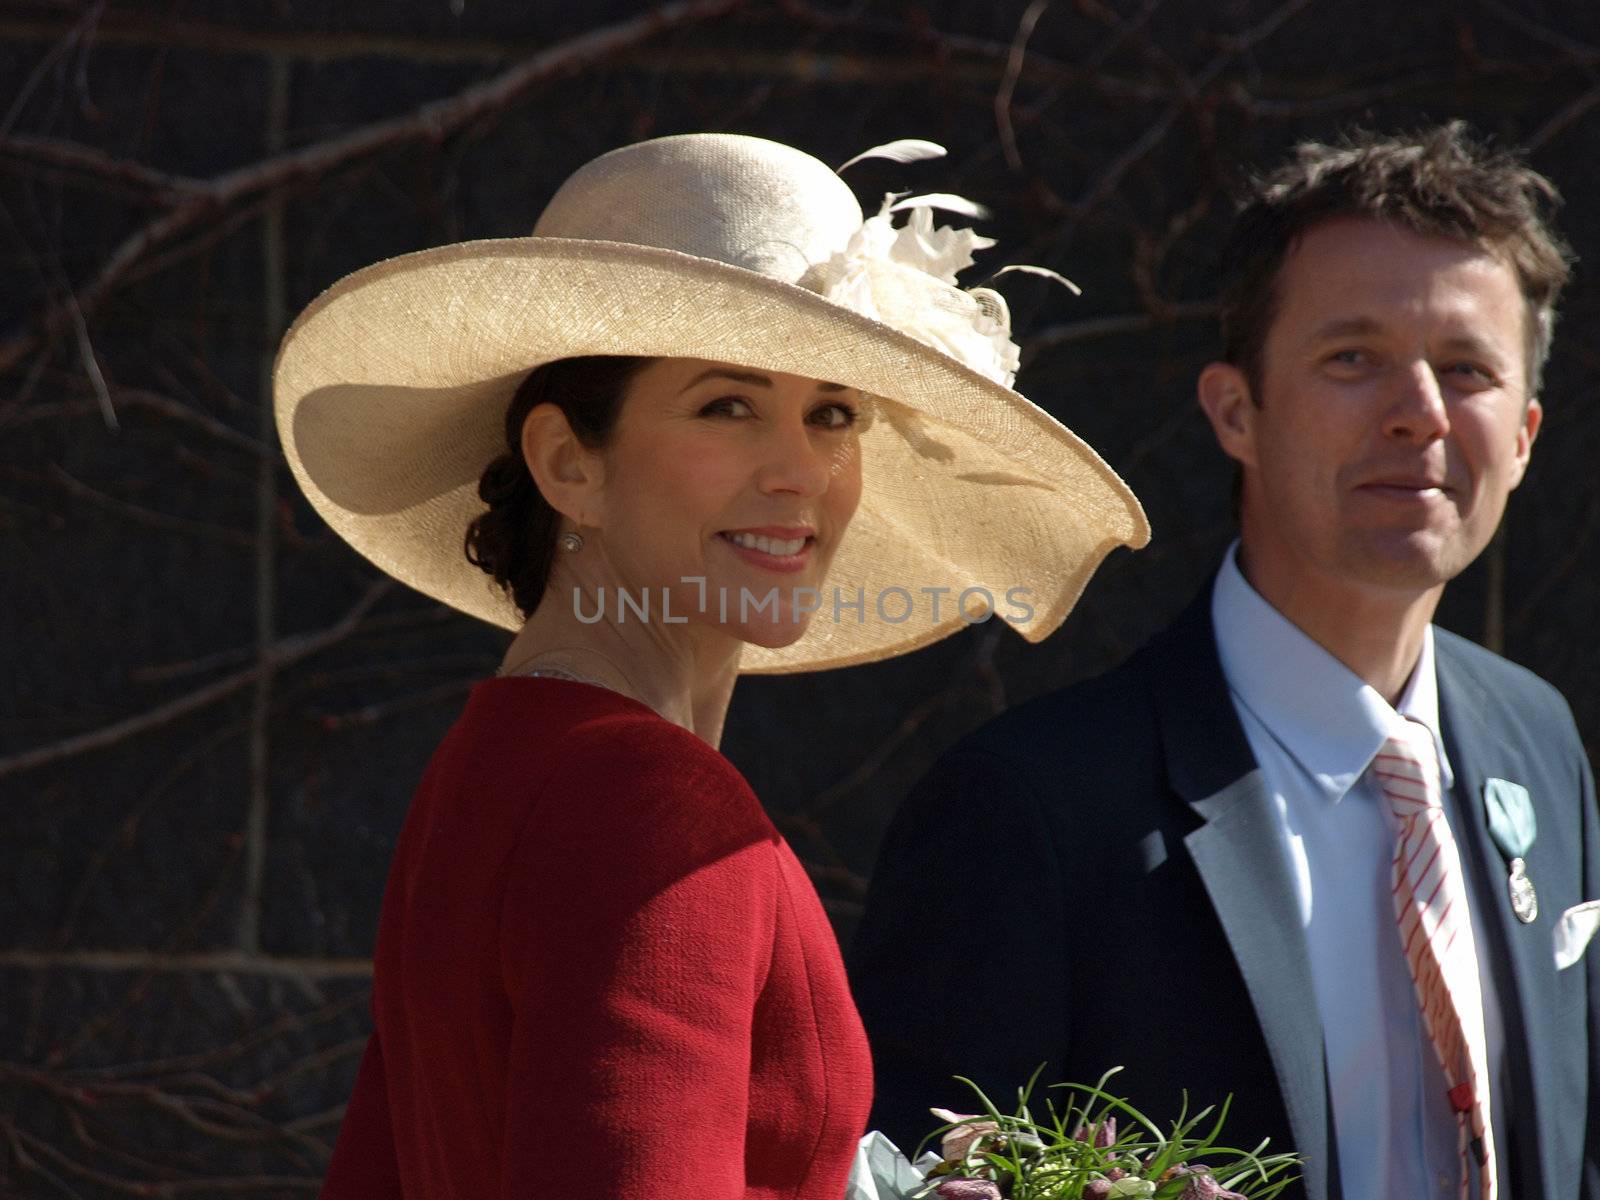 COPENHAGEN - APR 16: HRH Crown Prince Frederik and Princess Mary smile at the crowd infront of the Copenhagen City Hall during the celebration of Queen Margrethe's 70th birthday on April 16, 2010.

